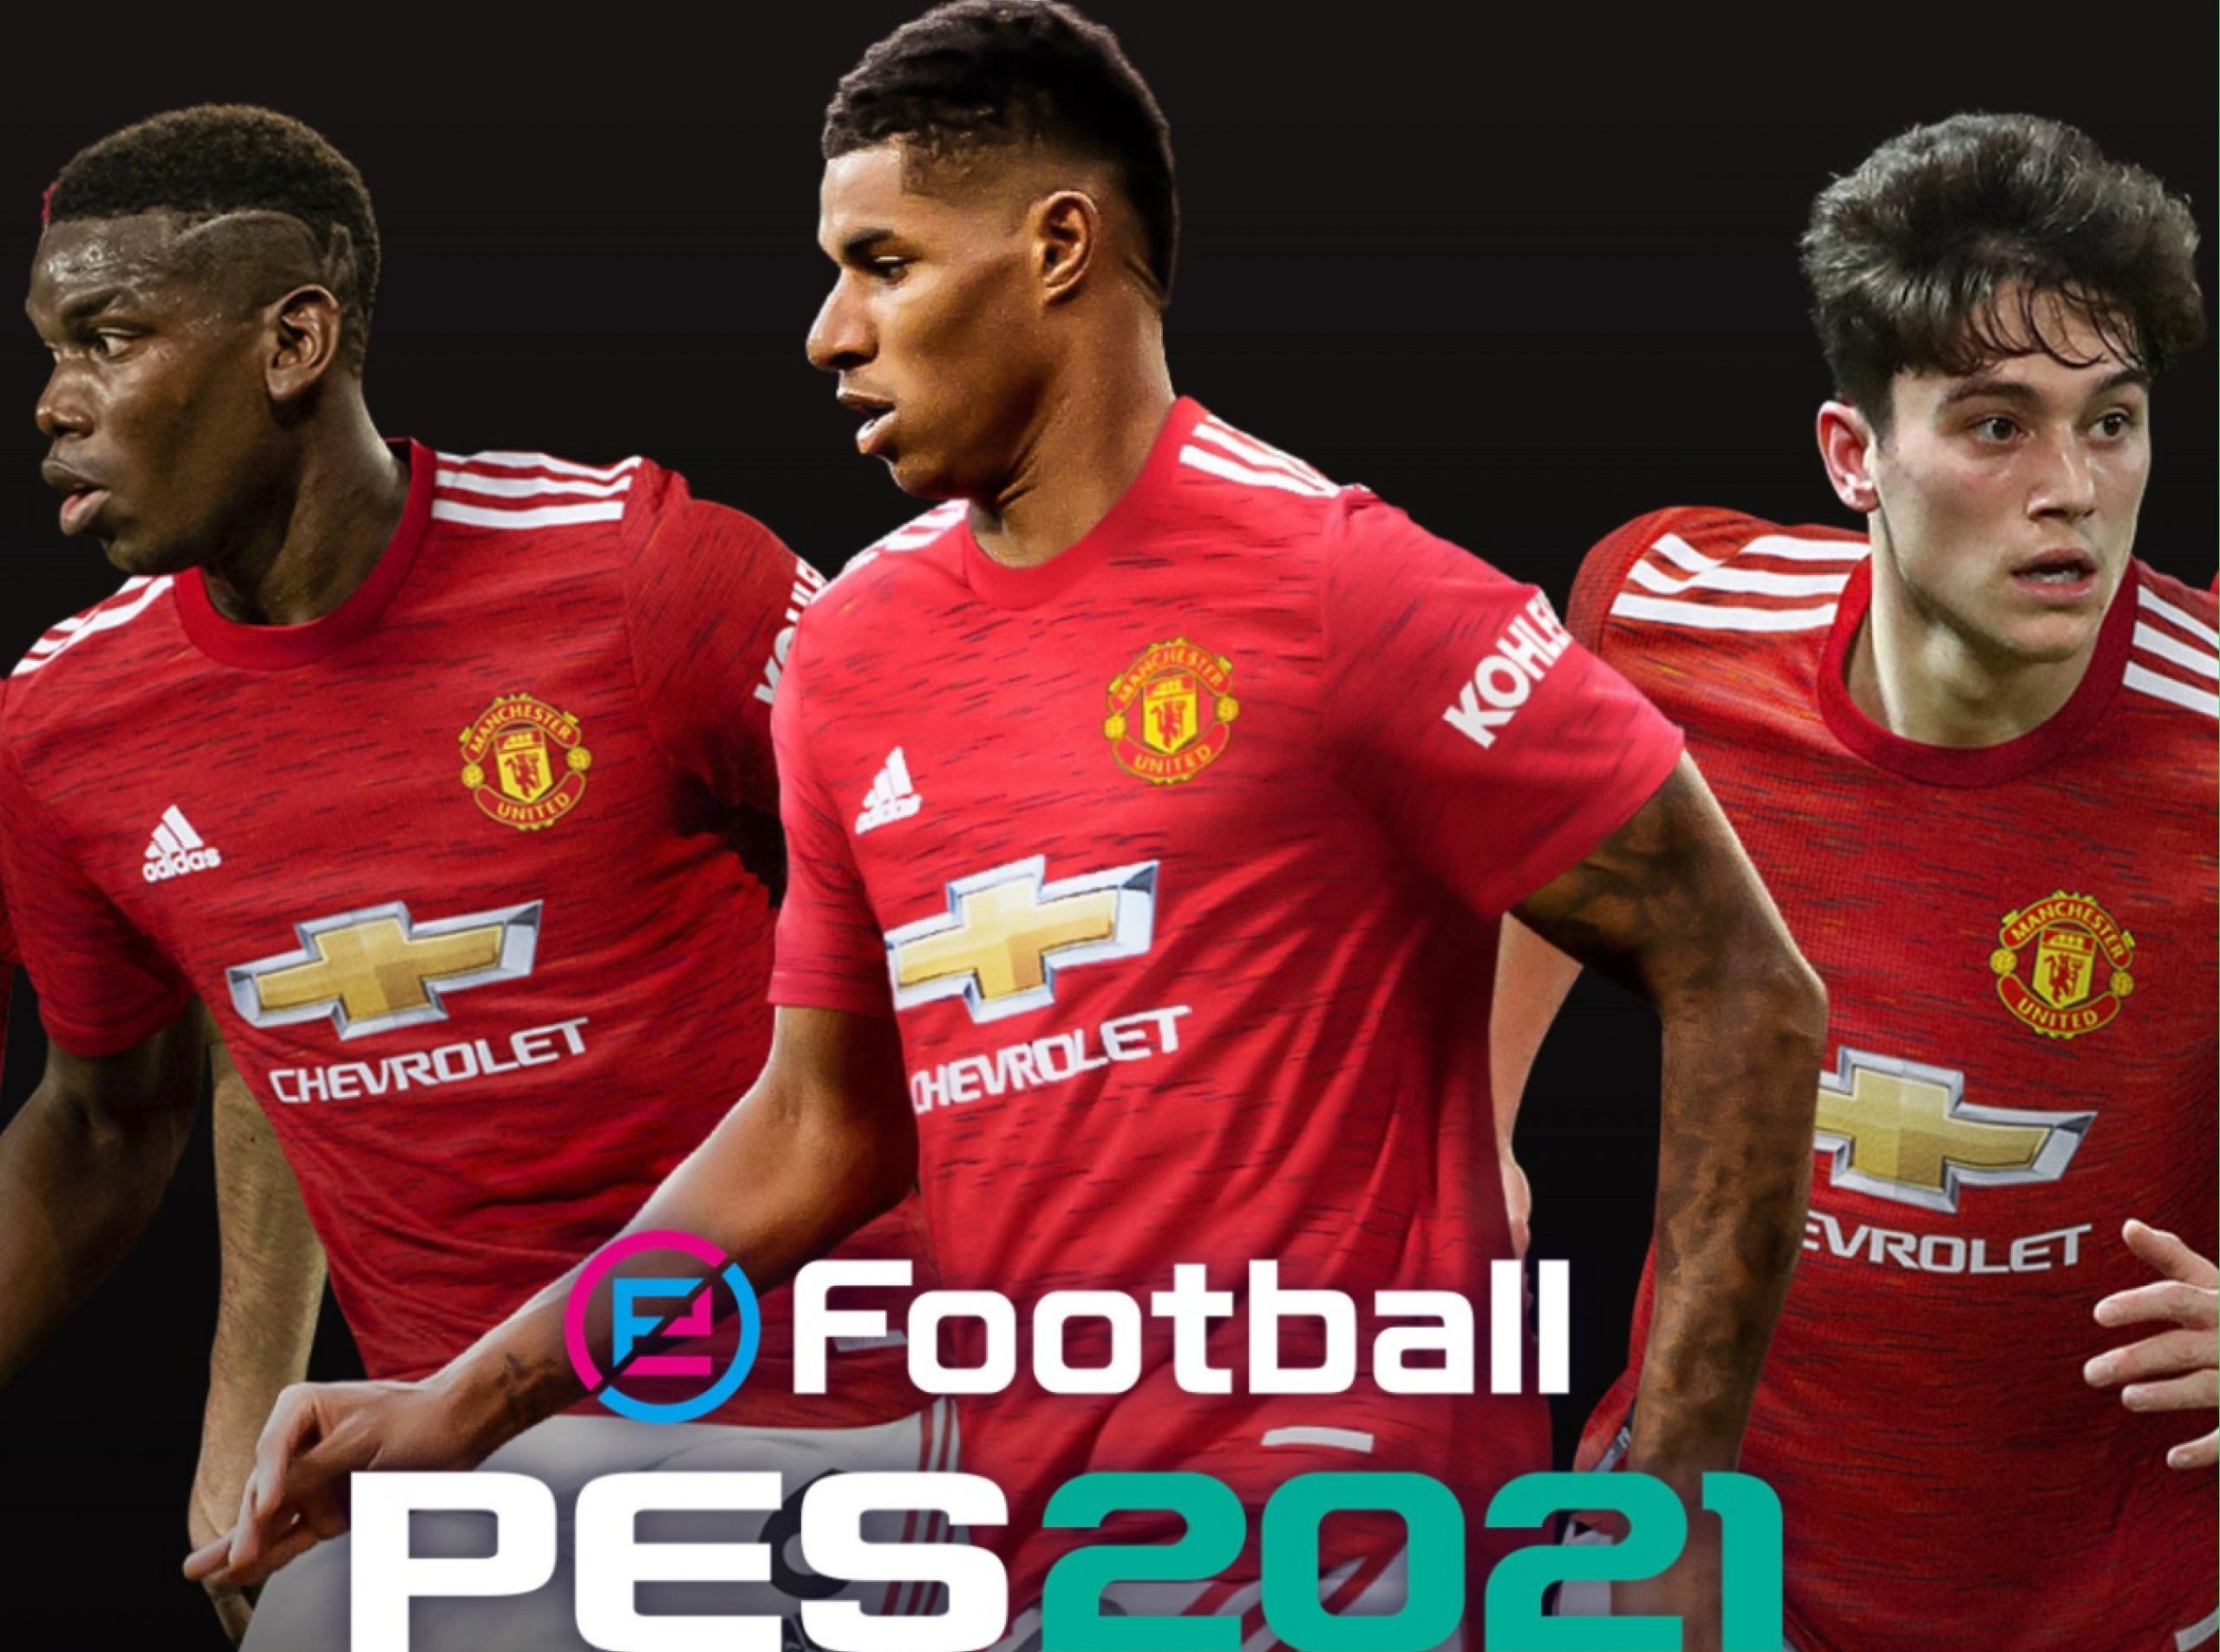 PES 2021 will have the most detailed recreation of Old Trafford ever seen in a video game